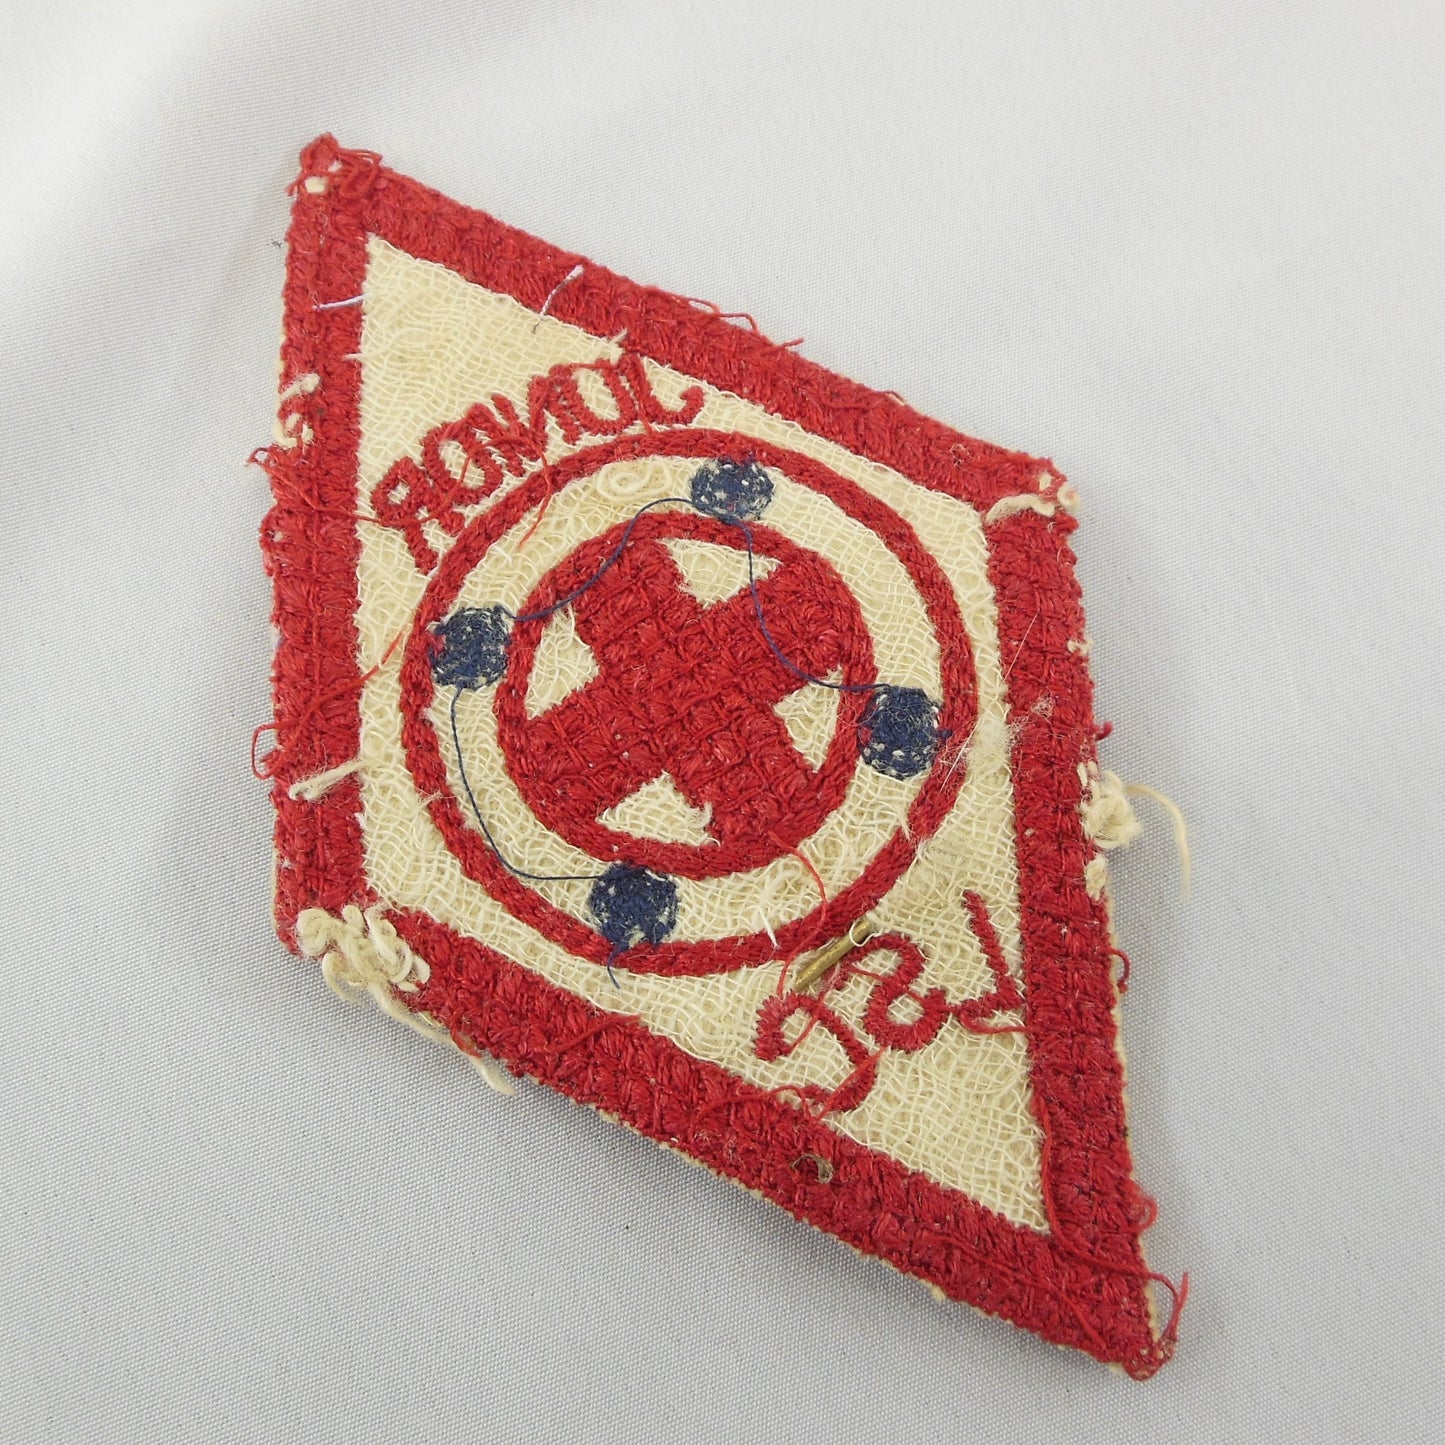 BSA Red Cross Junior LSC 1930's Patch & Boy Scout of America Be Prepared 1911 Pin Vintage